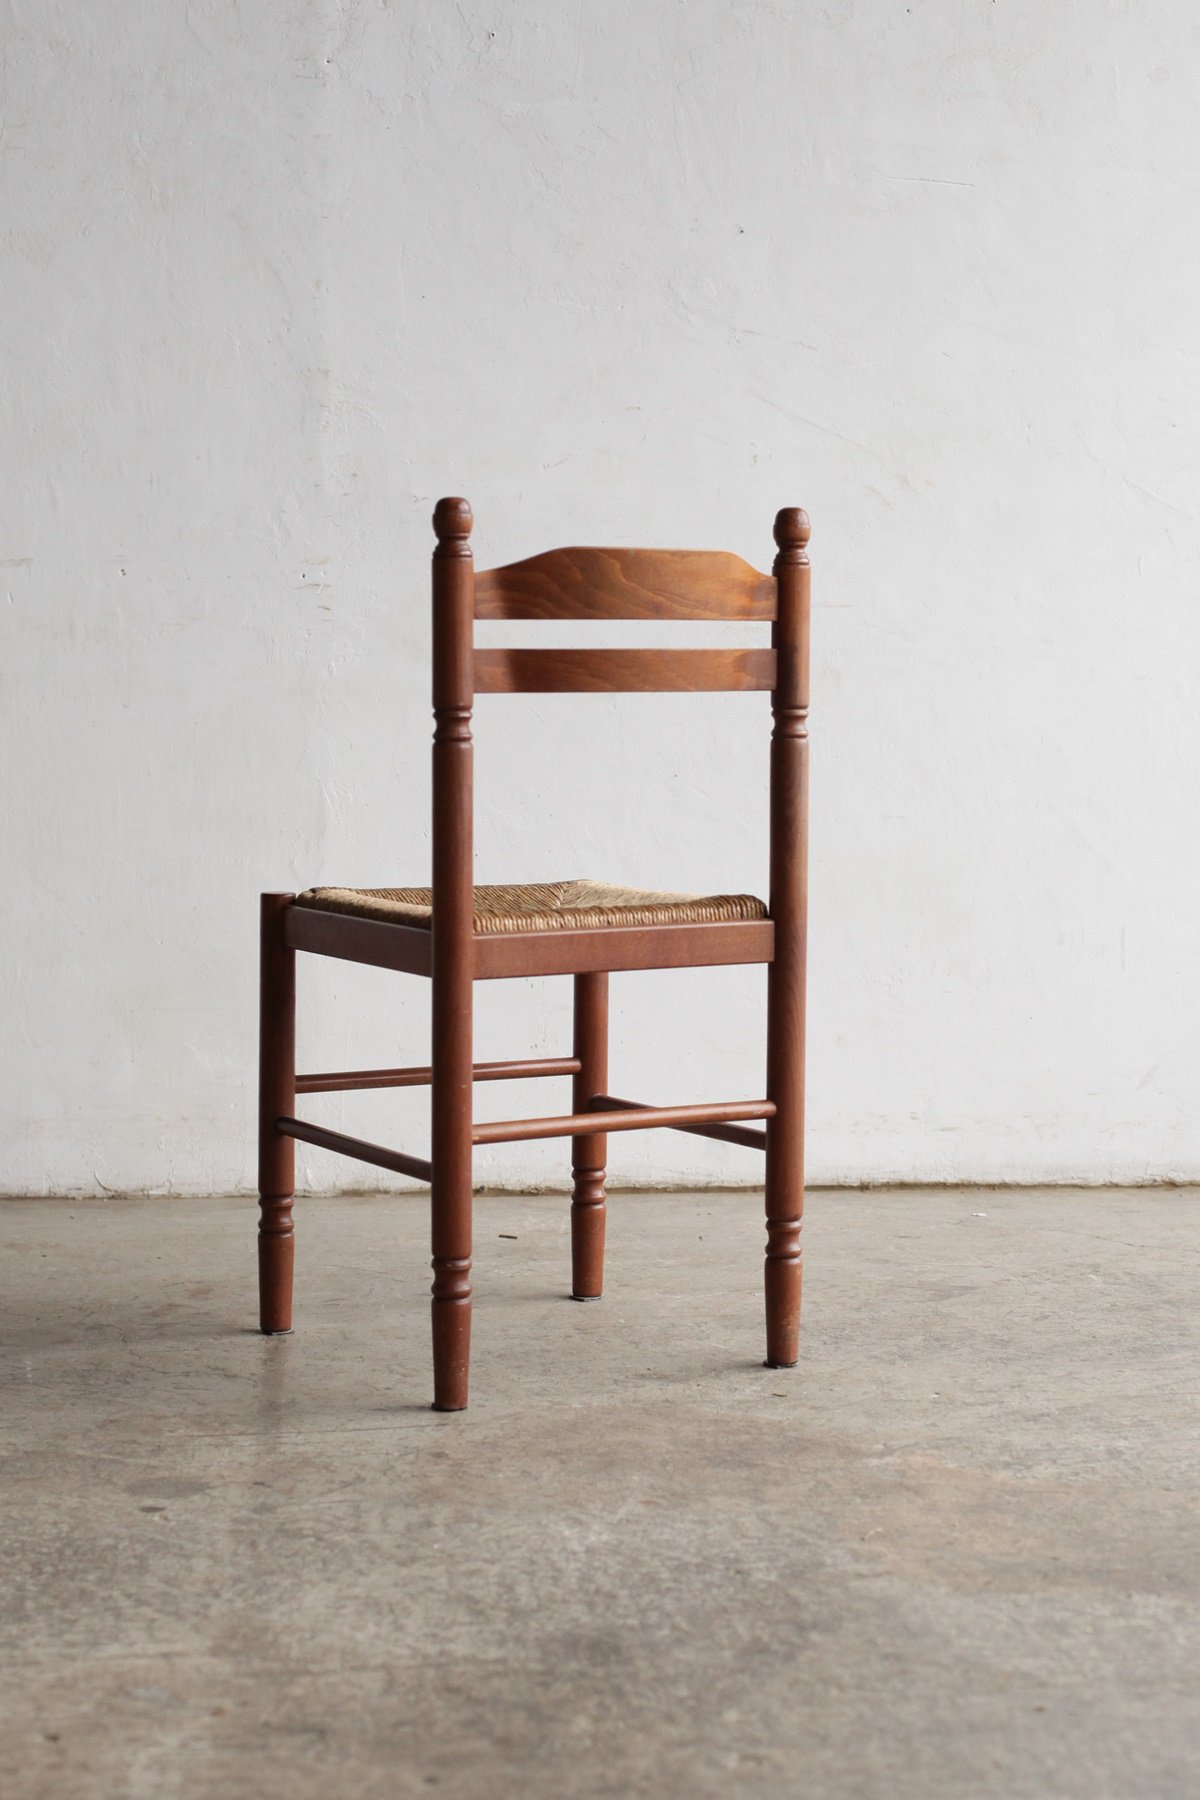 Wood chair[LY]